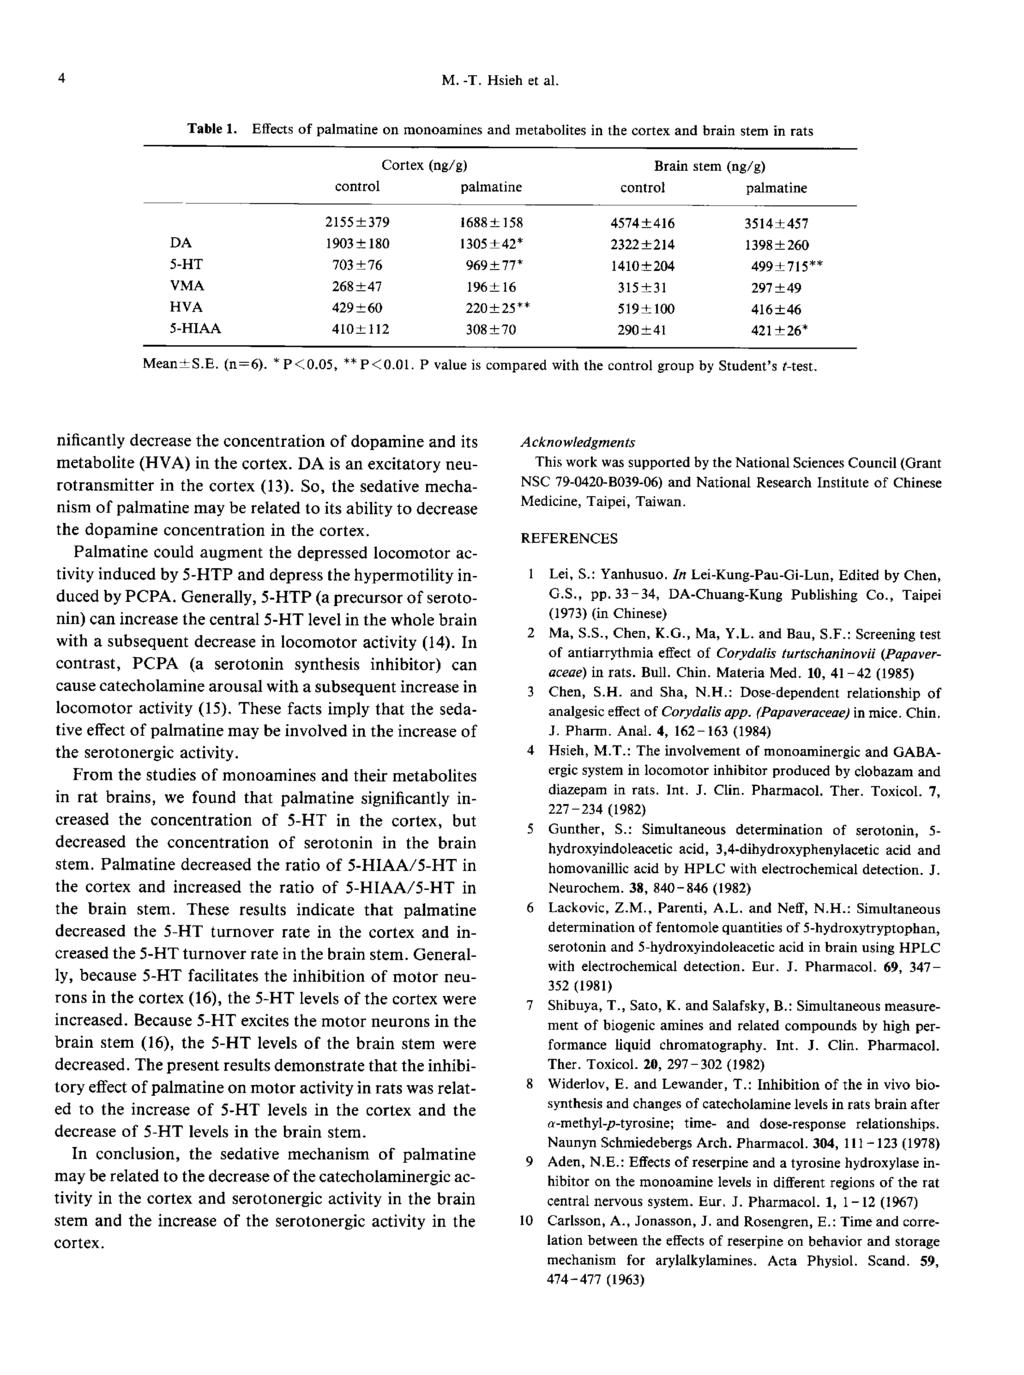 Table 1. Effects of palmatine on monoamines and metabolites in the cortex and brain stem in rats Mean±S.E. (n=6). * P<0.05, ** P<0.01. P value is compared with the control group by Student's t-test.